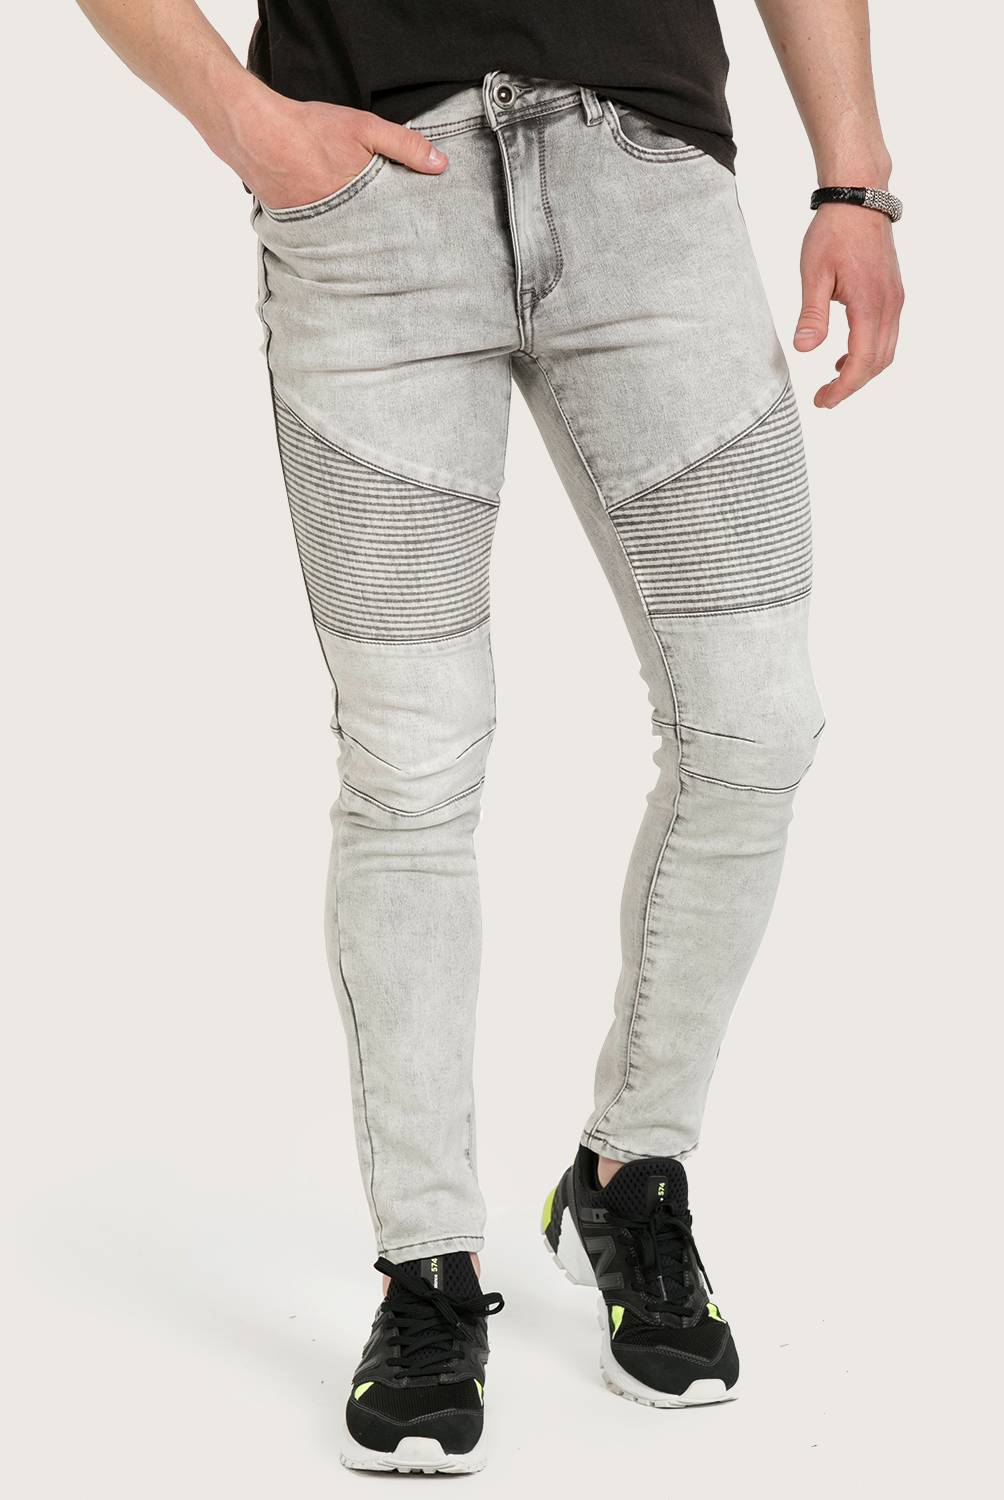 Mossimo - Jeans Skinny Fit Hombre